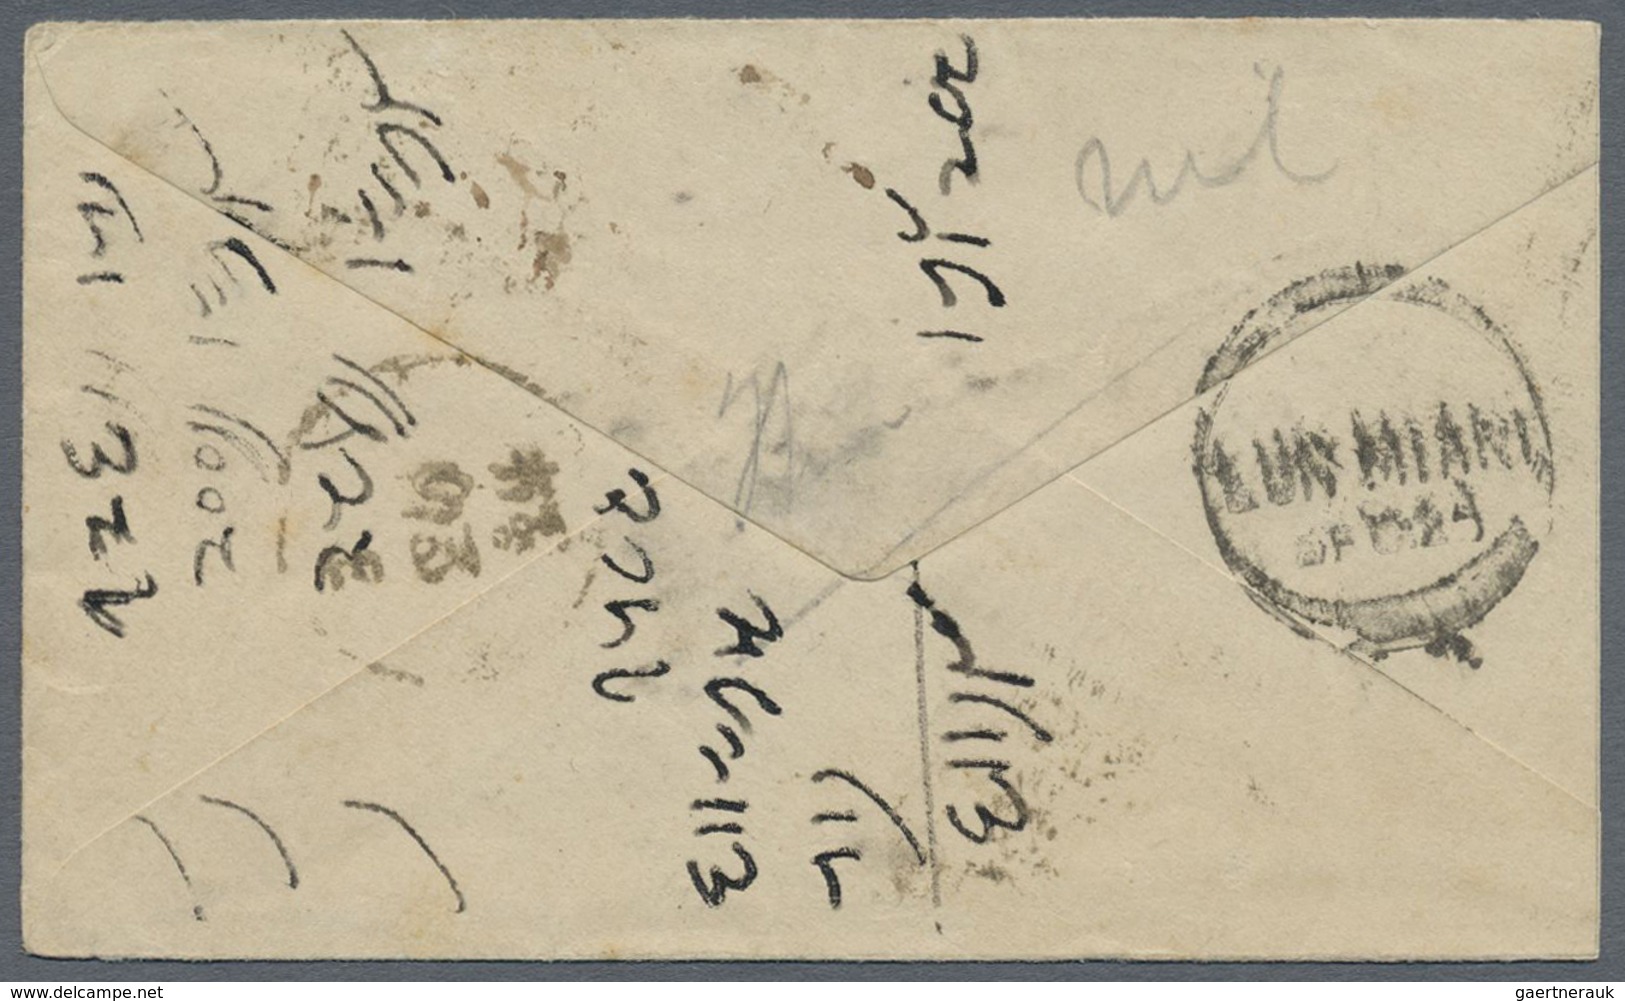 GA/Br/Brfst/O Indien - Feudalstaaten: JAMMU & KASHMIR 1860's-80's: Group of 10 covers and three stamps, with J&K-B